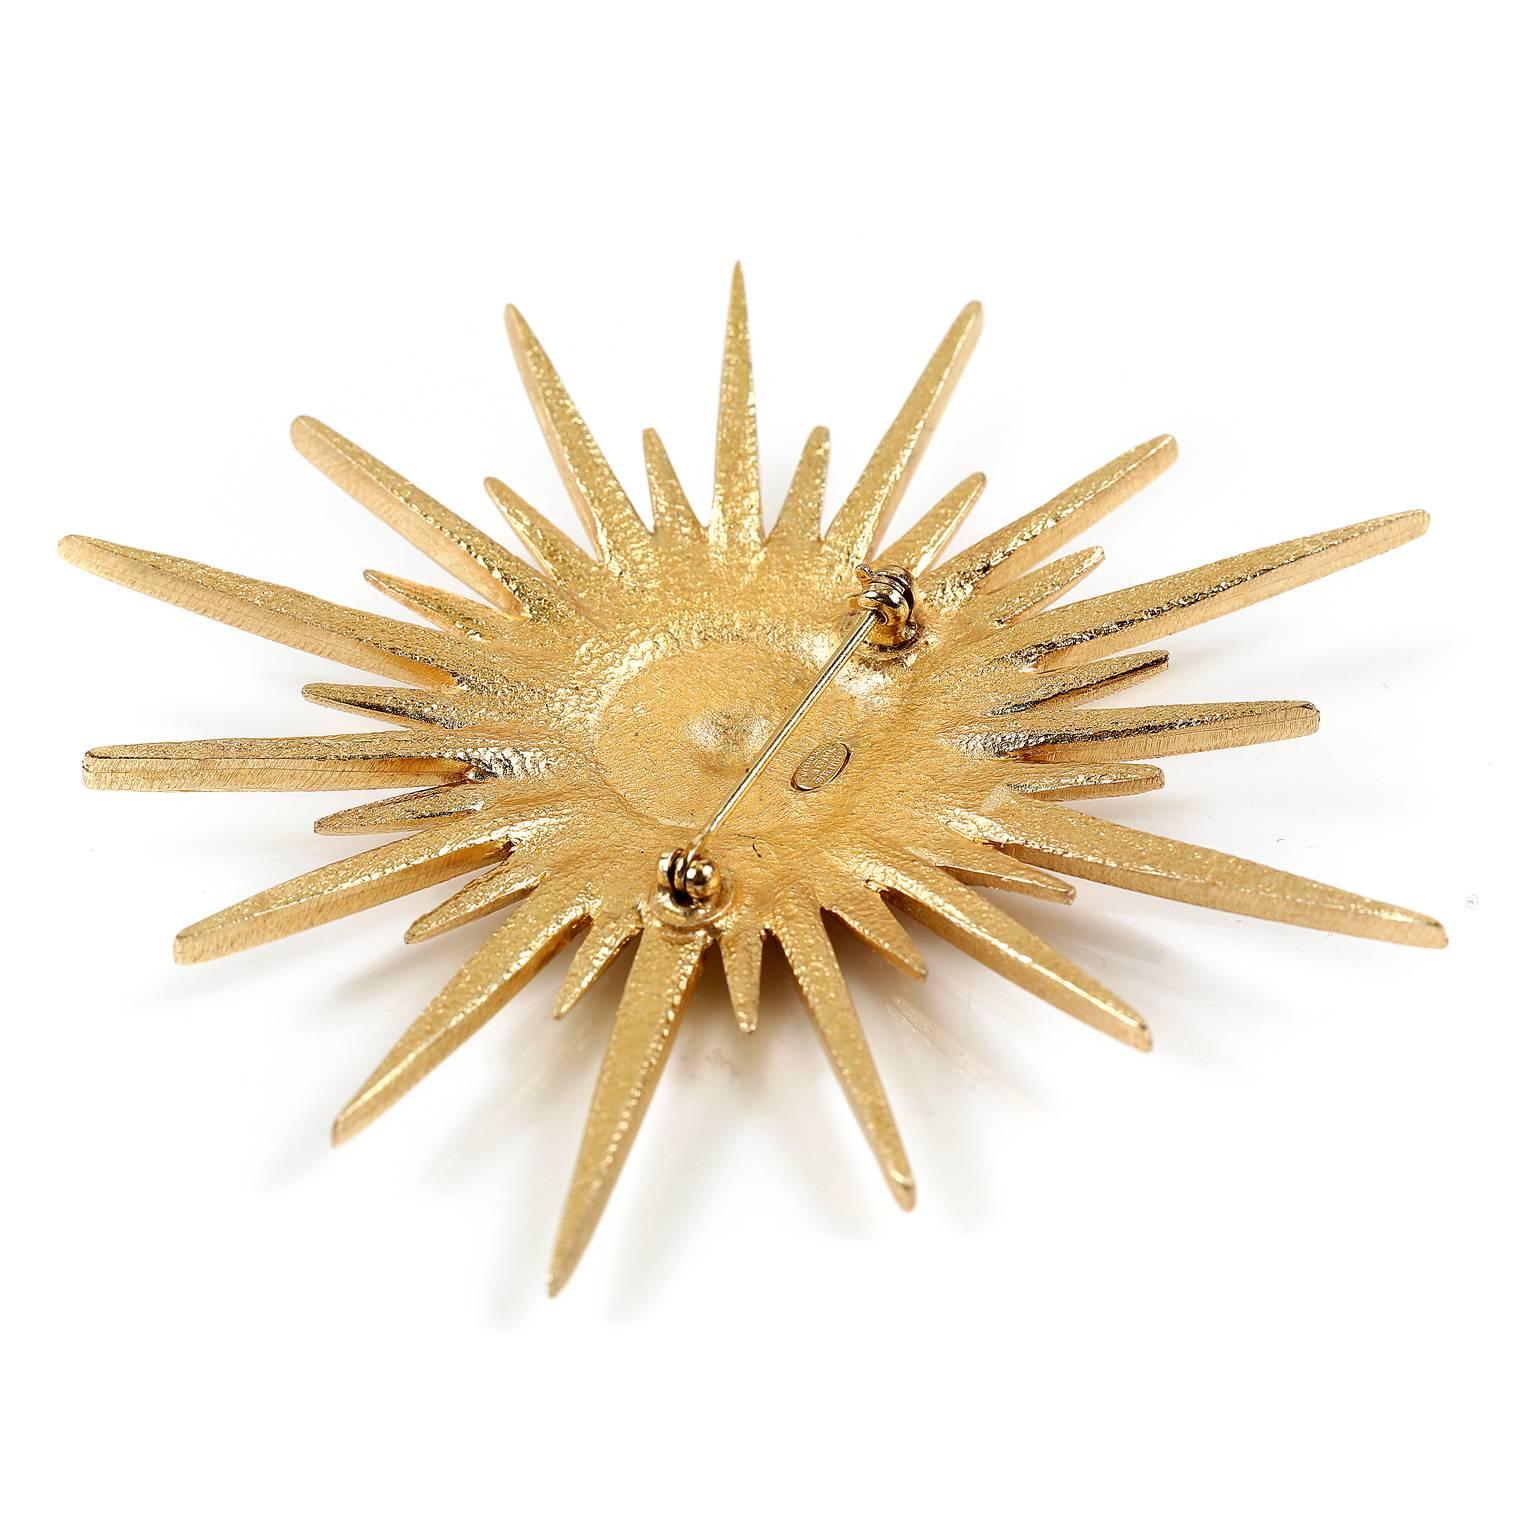 Chanel Gold Starburst Brooch- MINT condition
  A beautiful design, it enhances everything from lapels to scarves and more.
Matte gold starburst design has crystal embellishments.  Interlocking CC in the center. Rear fastener with safety catch. 